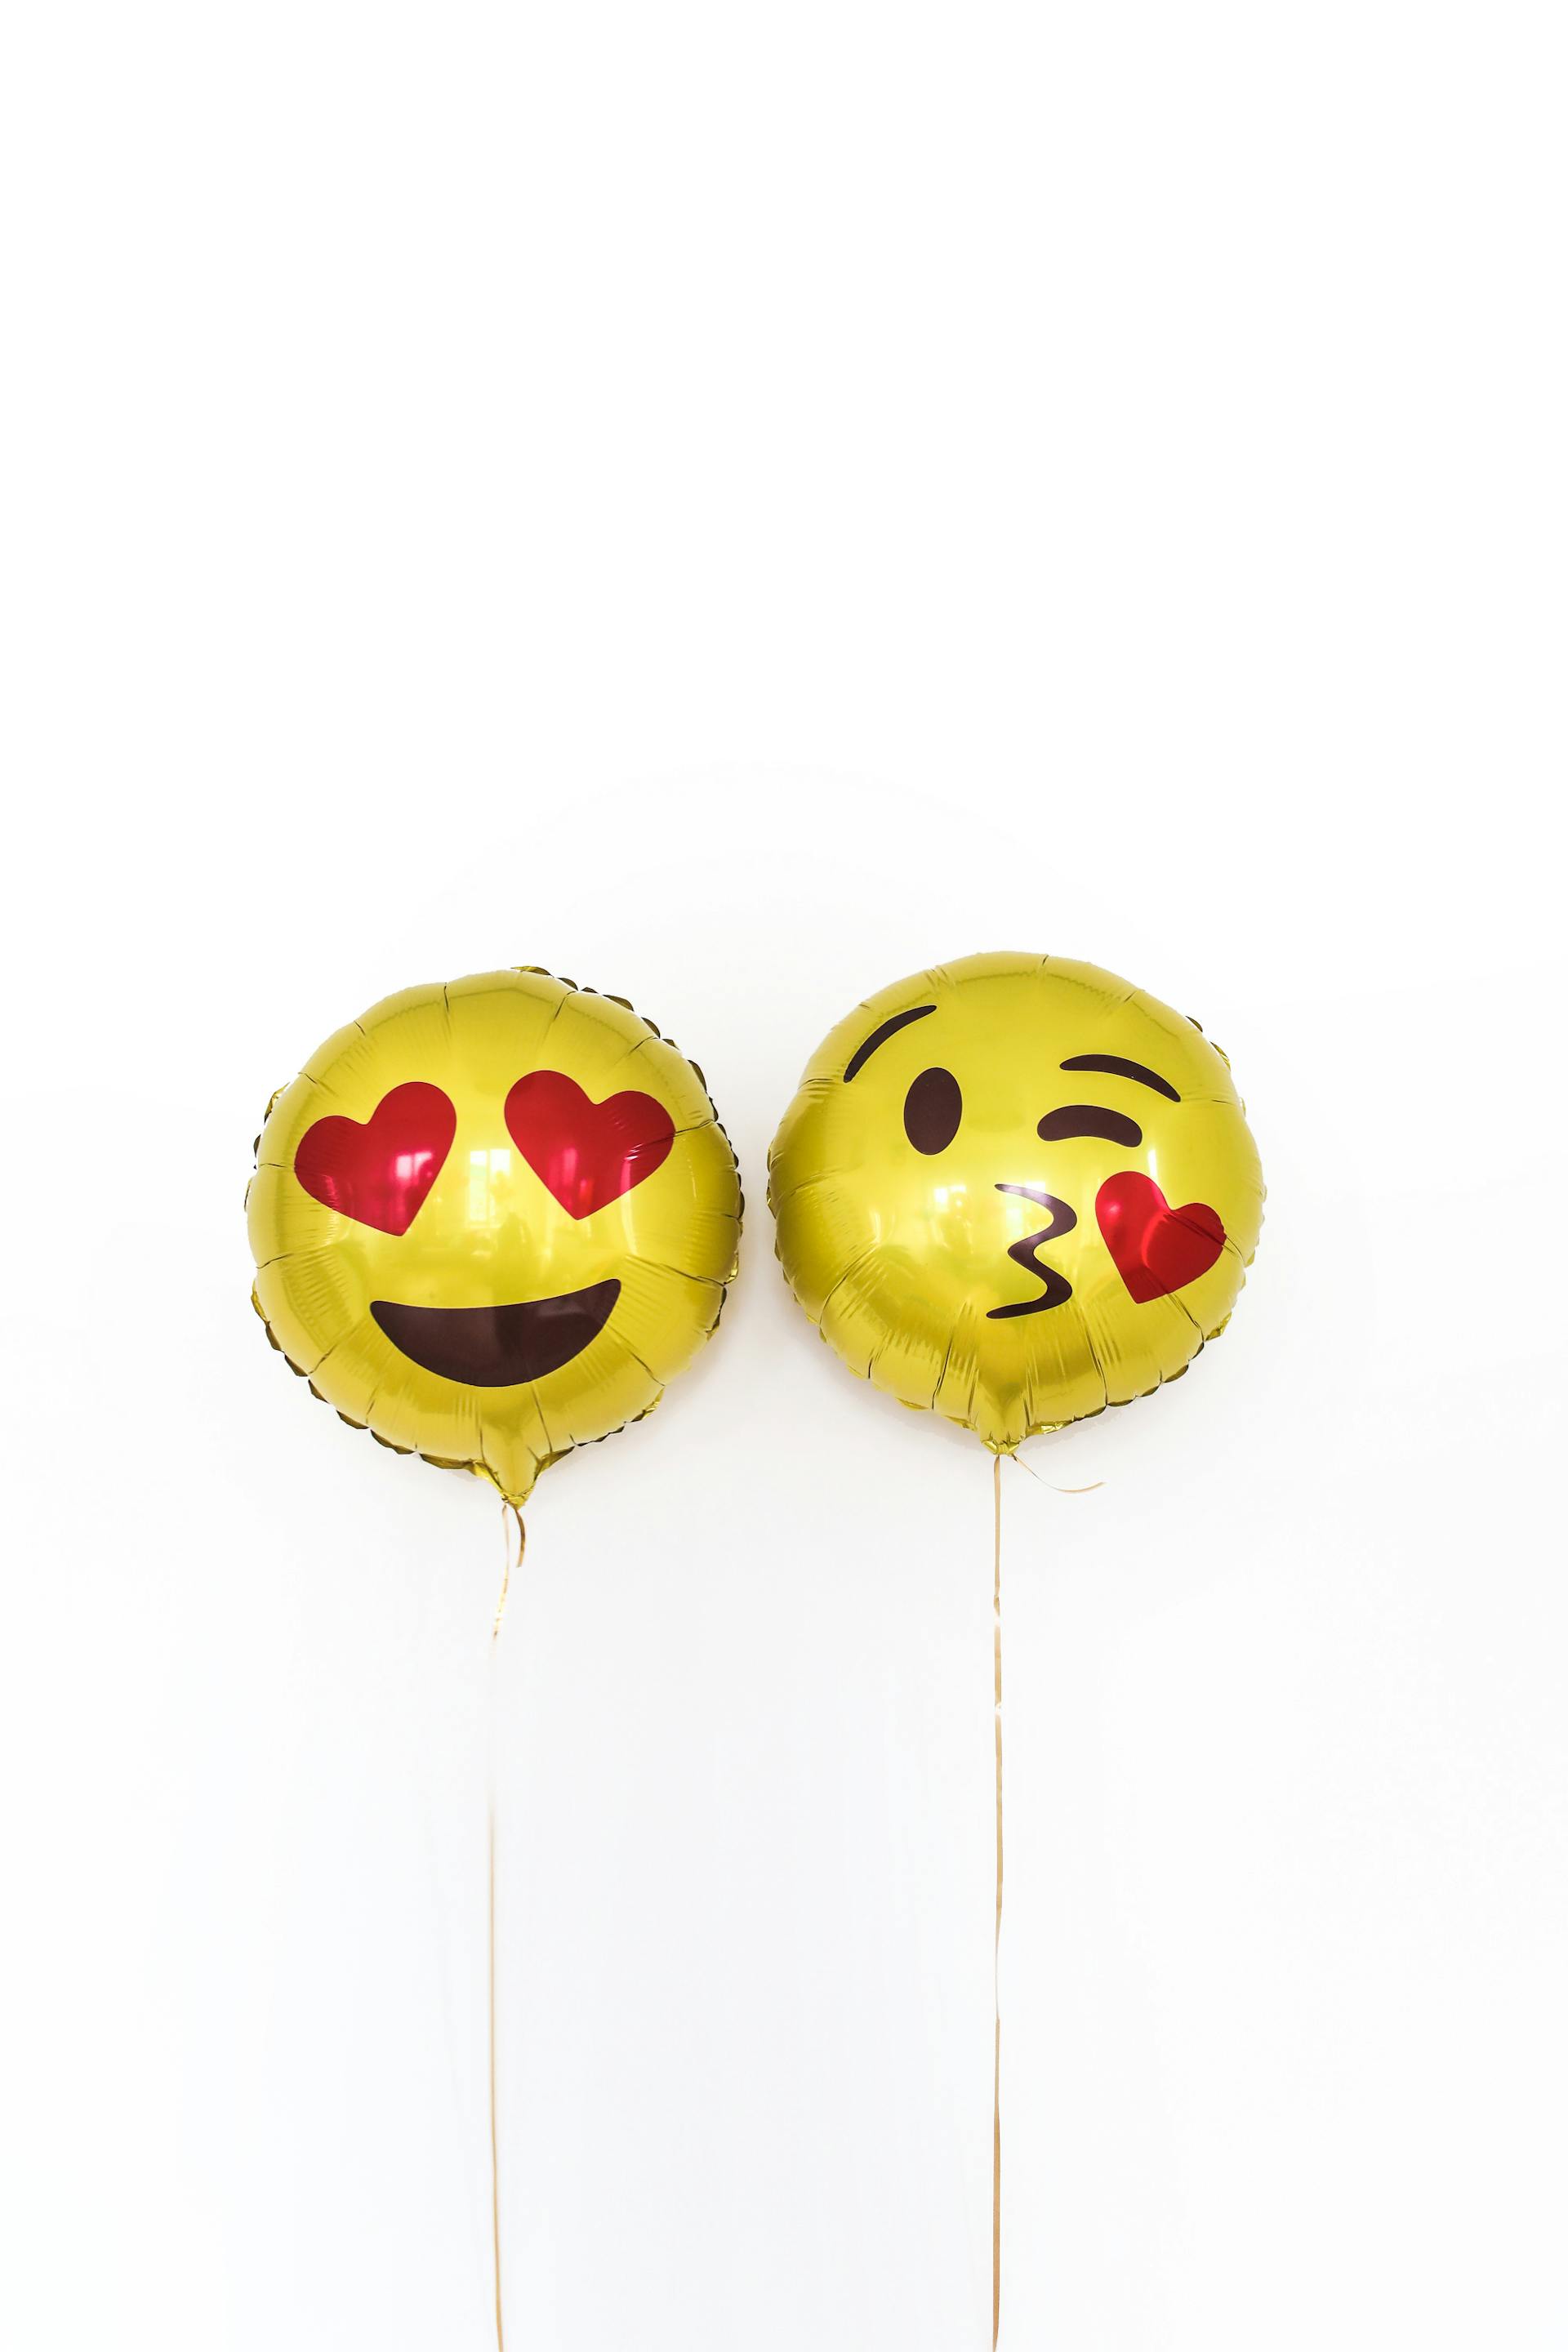 Two yellow balloons with emoji icons | Source: Pexels